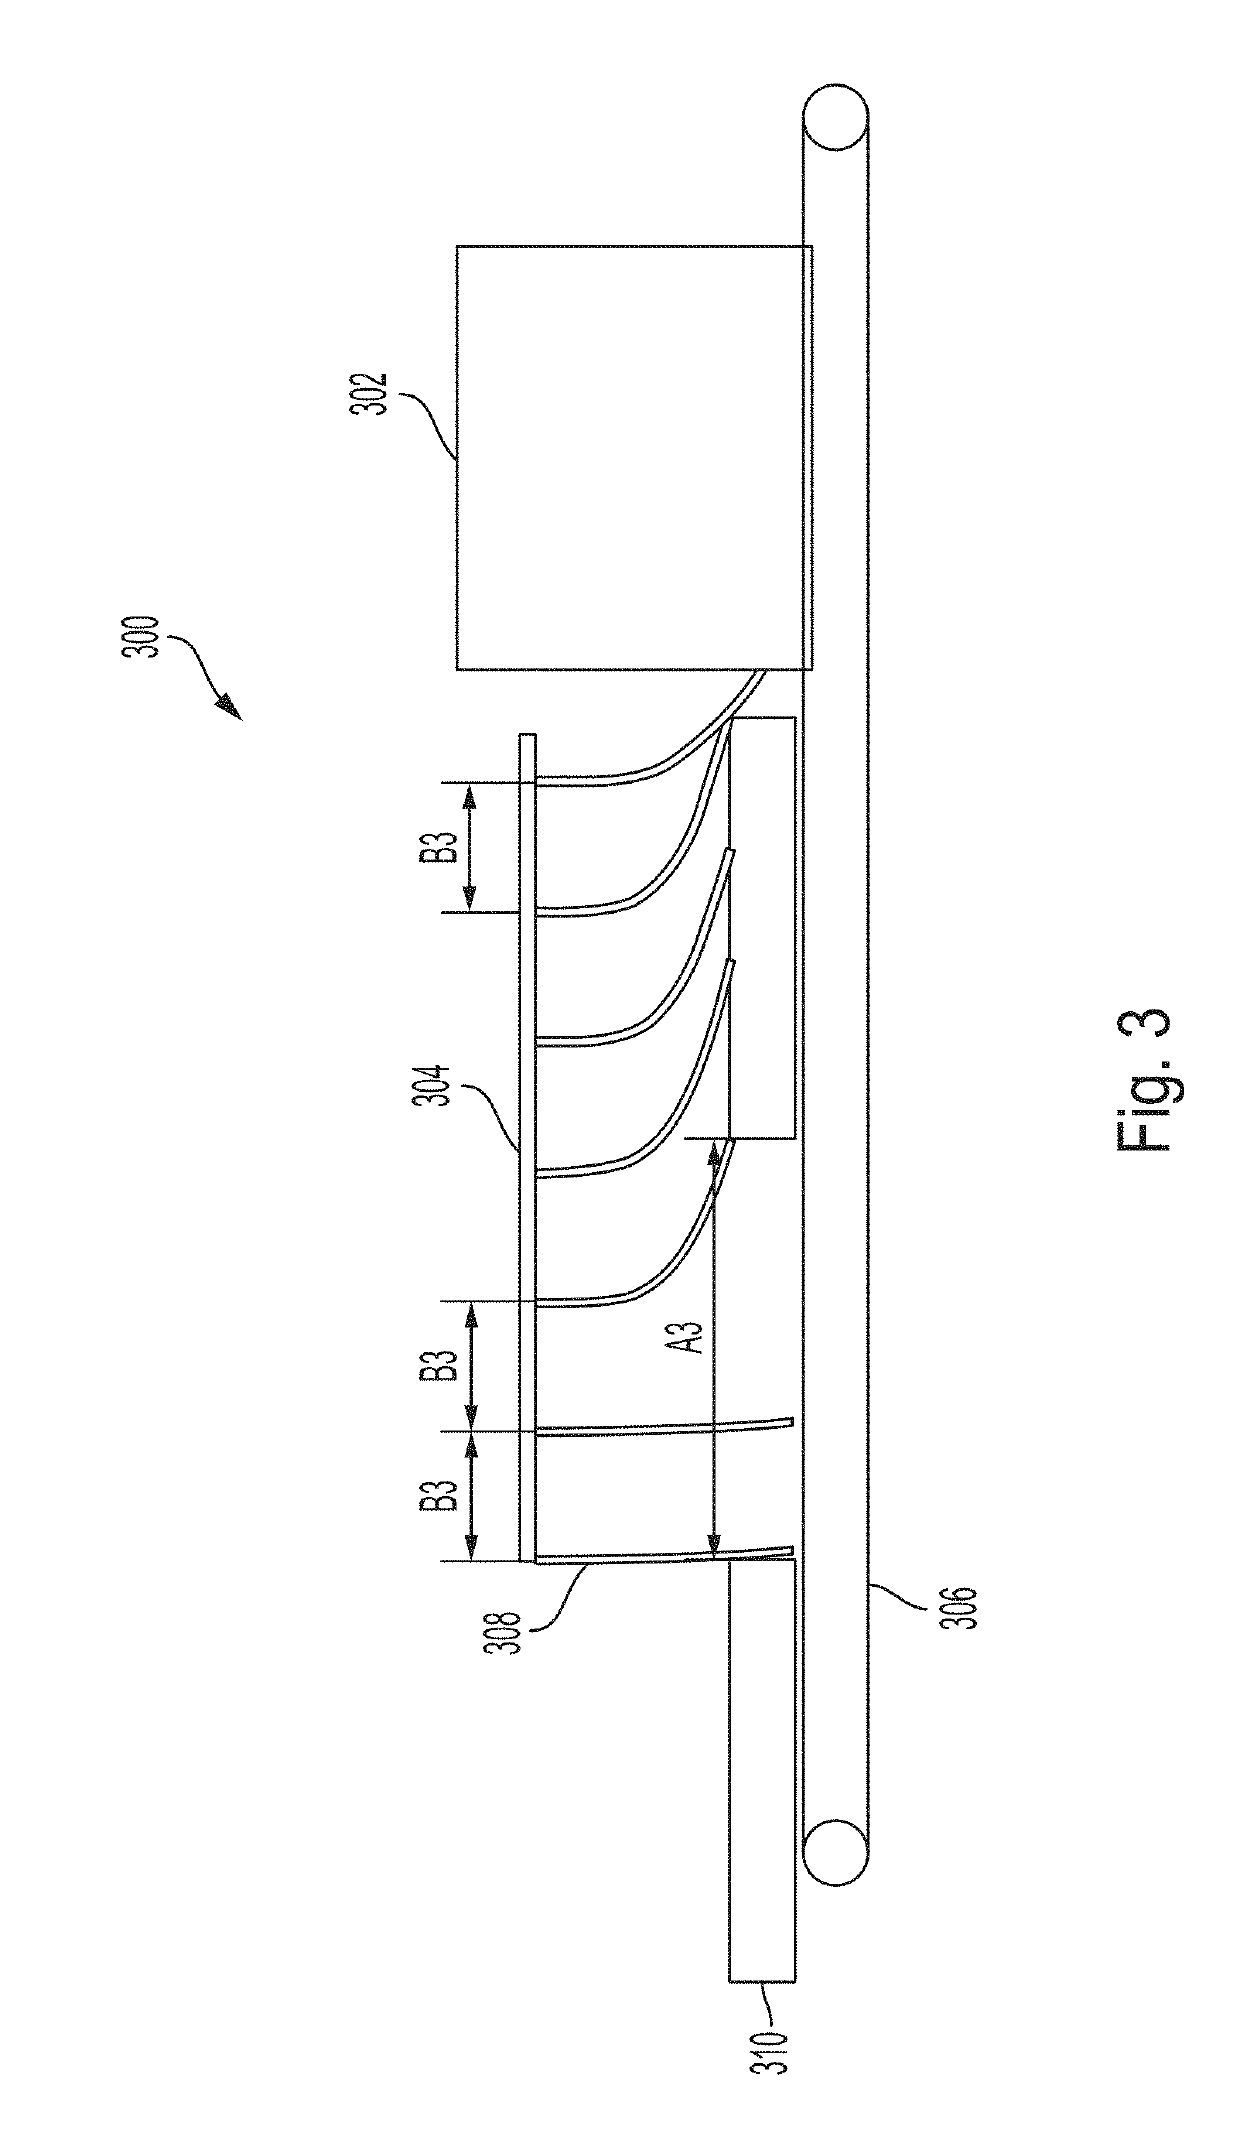 Method and apparatus to reduce radiation emissions on a parcel scanning system